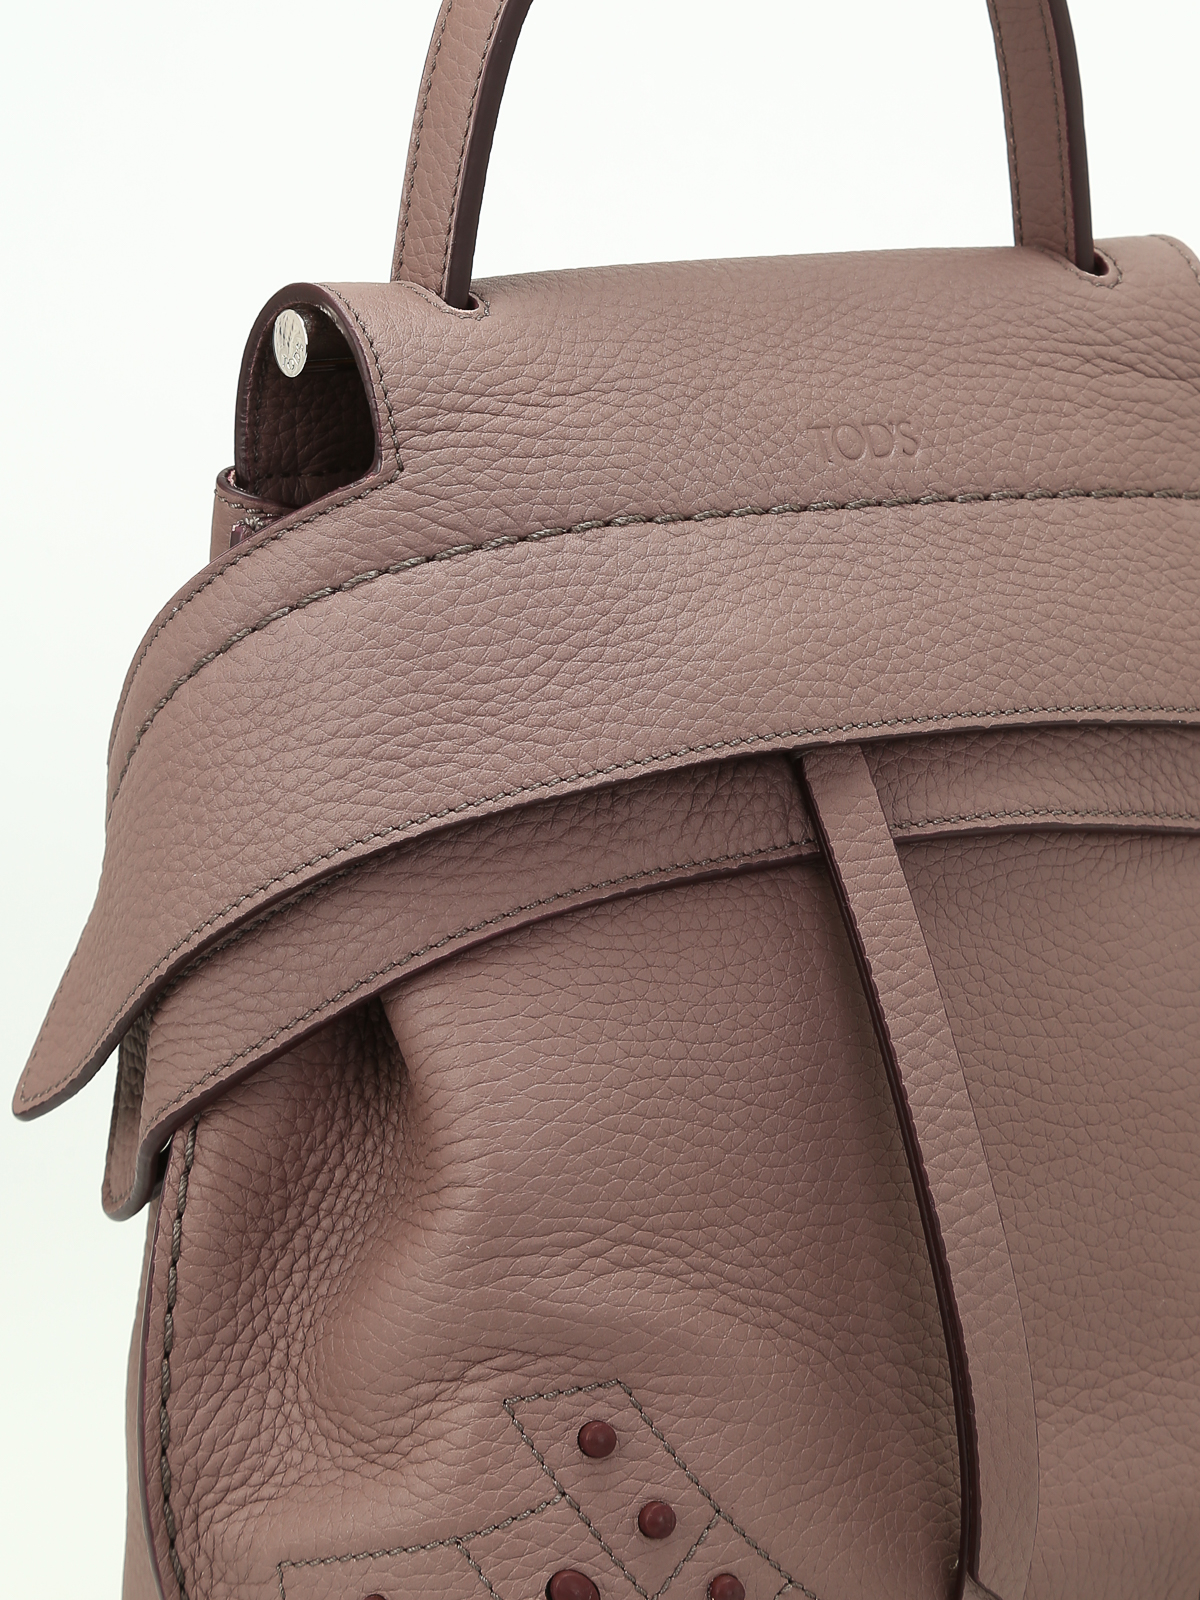 tods backpack sale